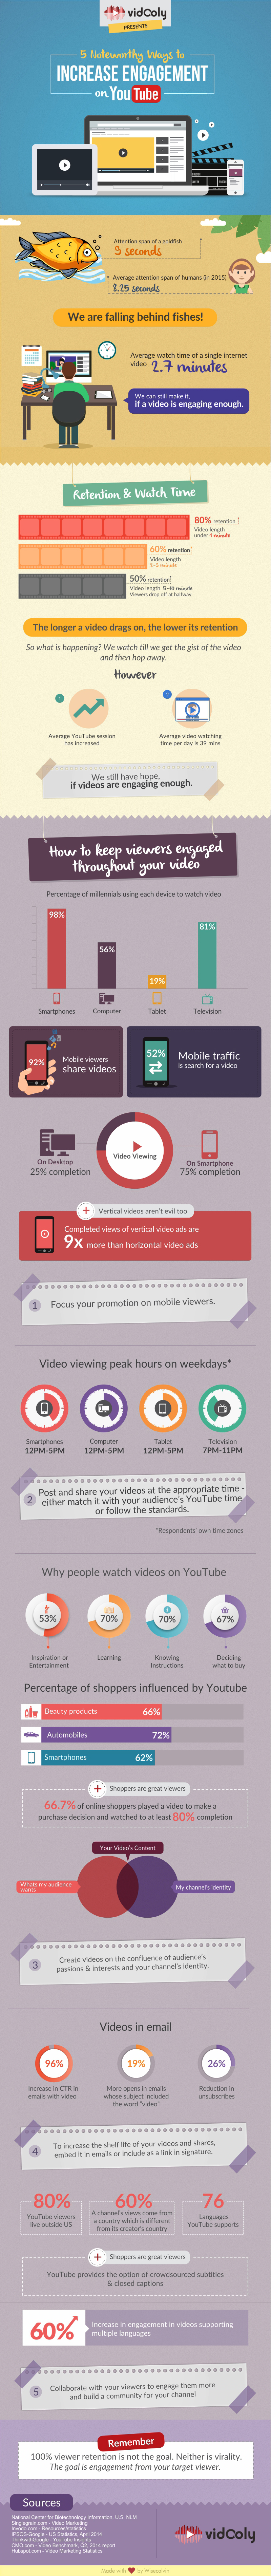 YouTube-engagement-infographic